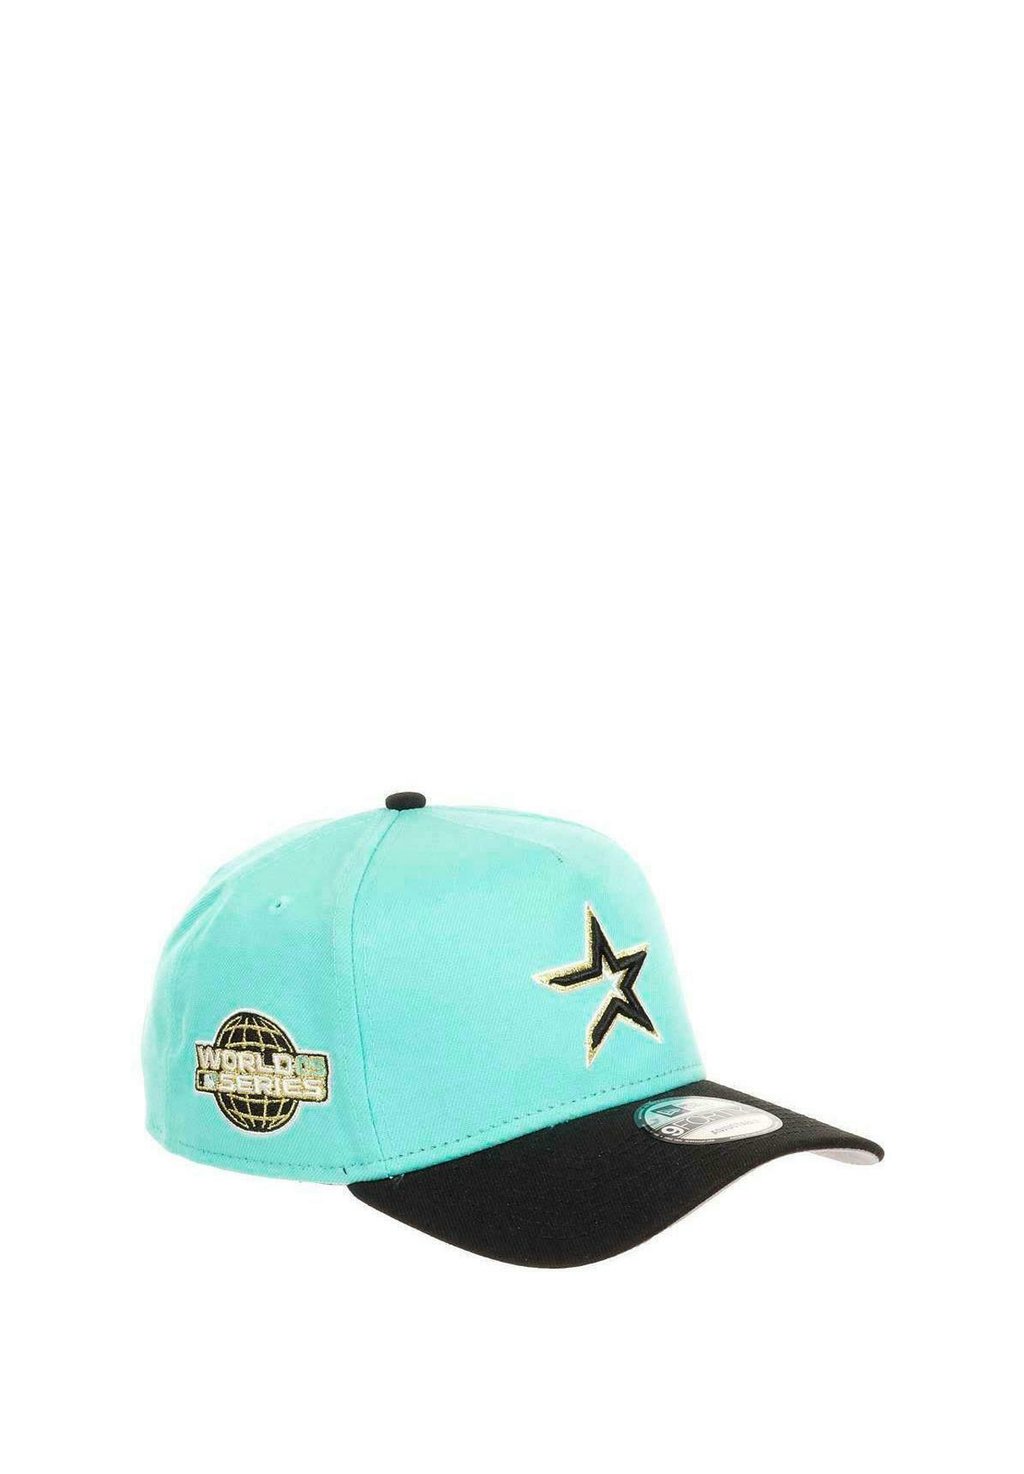 Бейсболка HOUSTON ASTROS MLB WORLD SERIES SIDEPATCH COOPERSTOWN 9FORTY A-FRAME SNAPBACK New Era, цвет turquoise